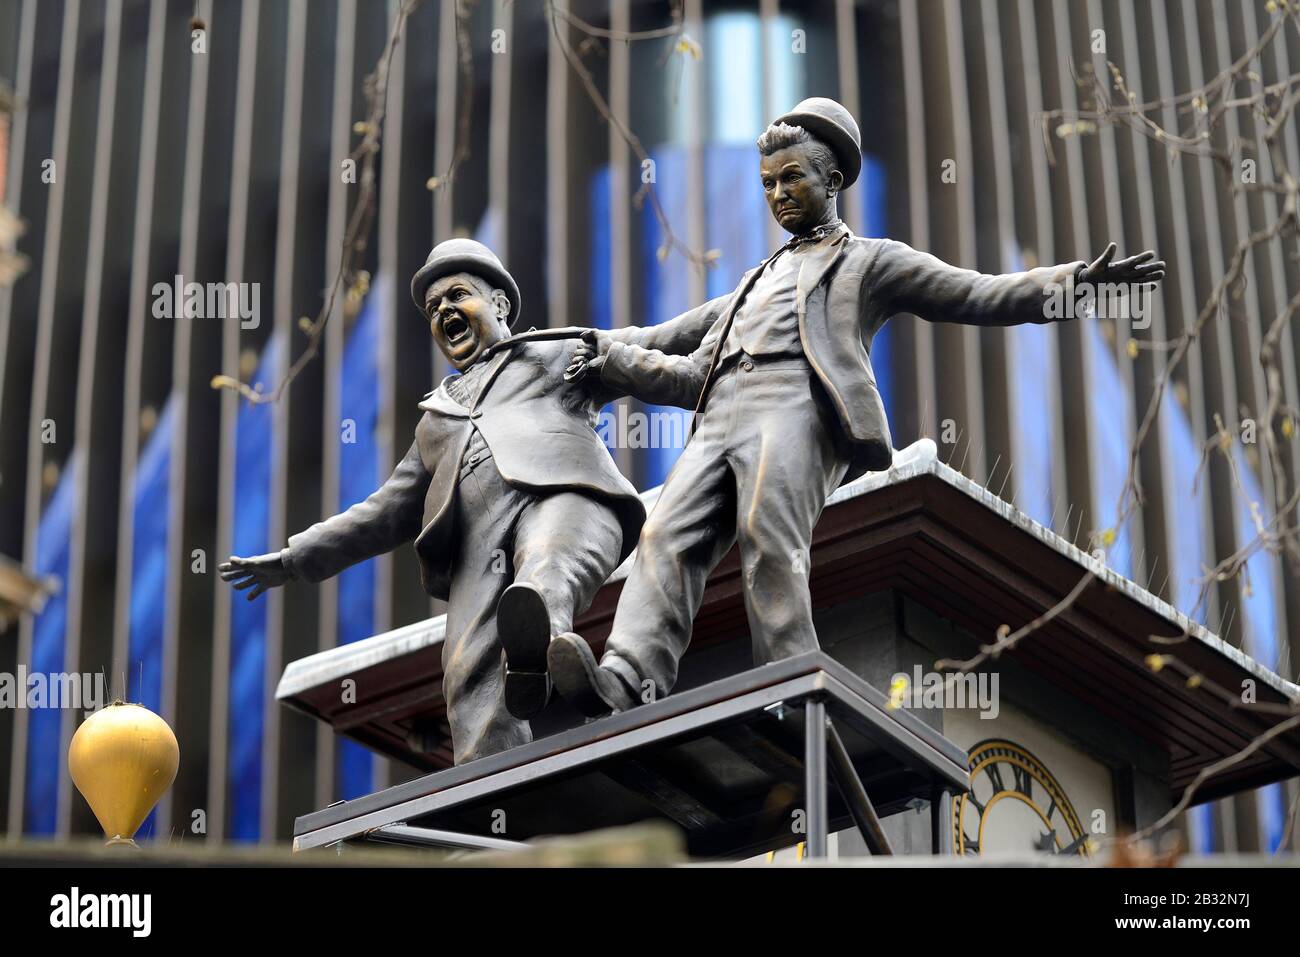 London, England, UK. 'Scenes in the Square' statue trail - Laurel and Hardy Stock Photo